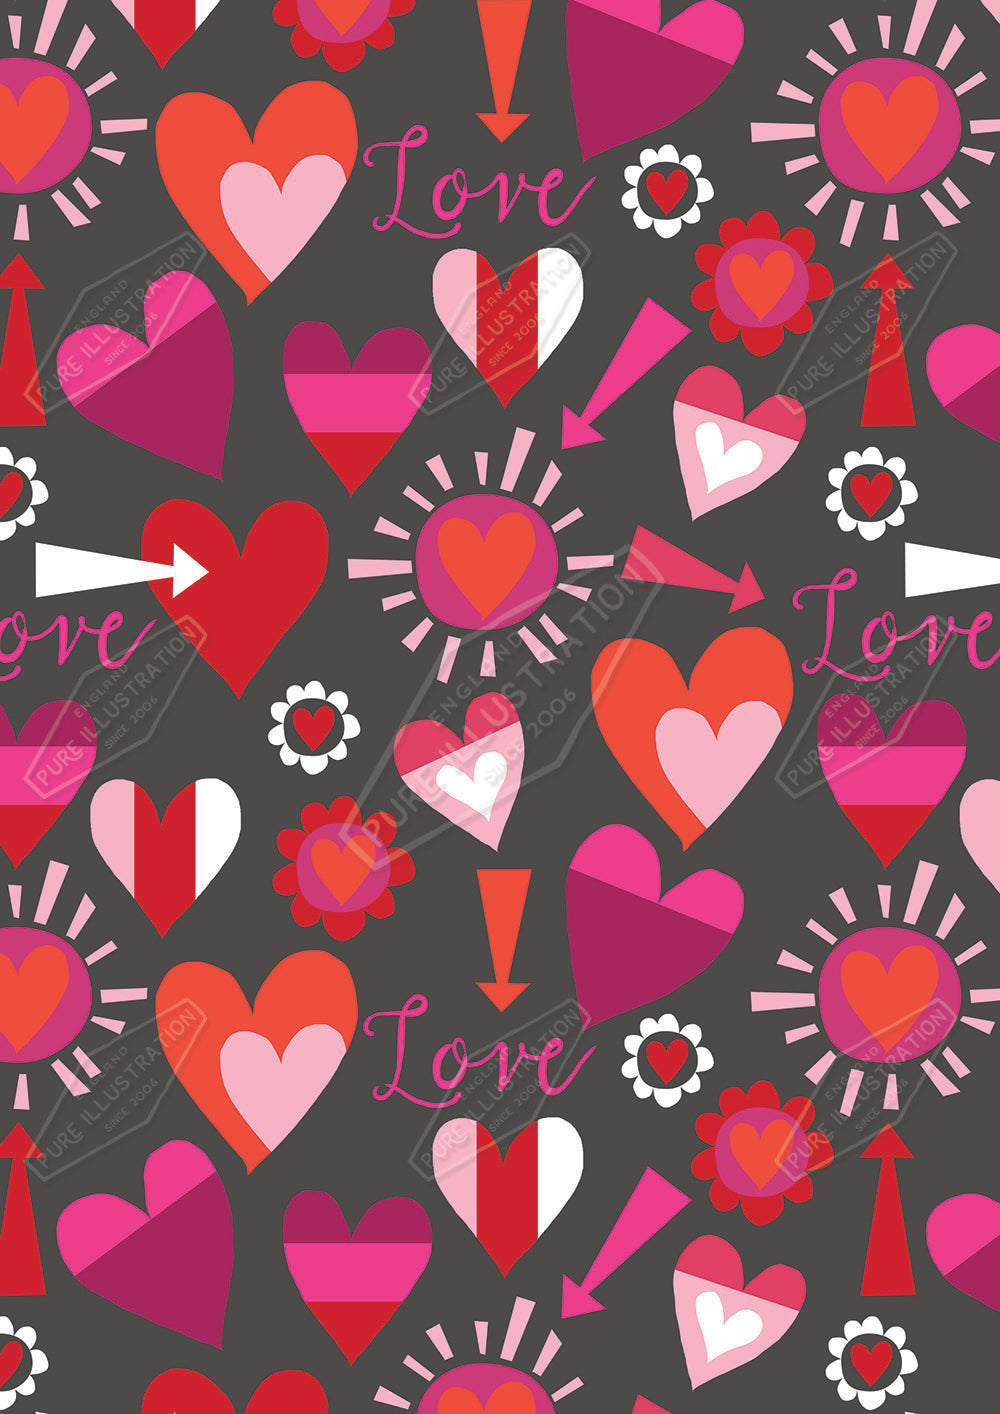 00030149KSP- Kerry Spurling is represented by Pure Art Licensing Agency - Valentines Pattern Design